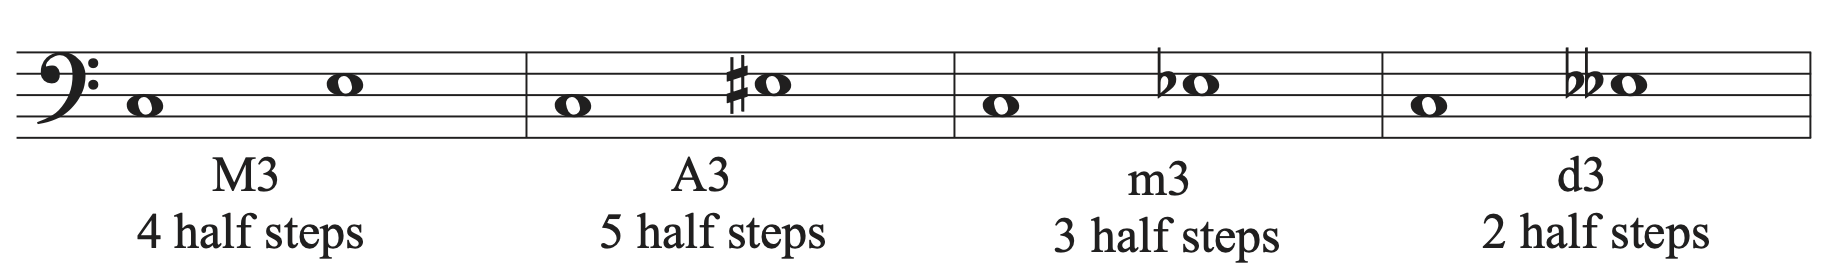 An interval of a major third with 4 half steps, an augmented third with 5 half steps, a minor third with 3 half steps, and a diminished third with 2 half steps shown on a staff.